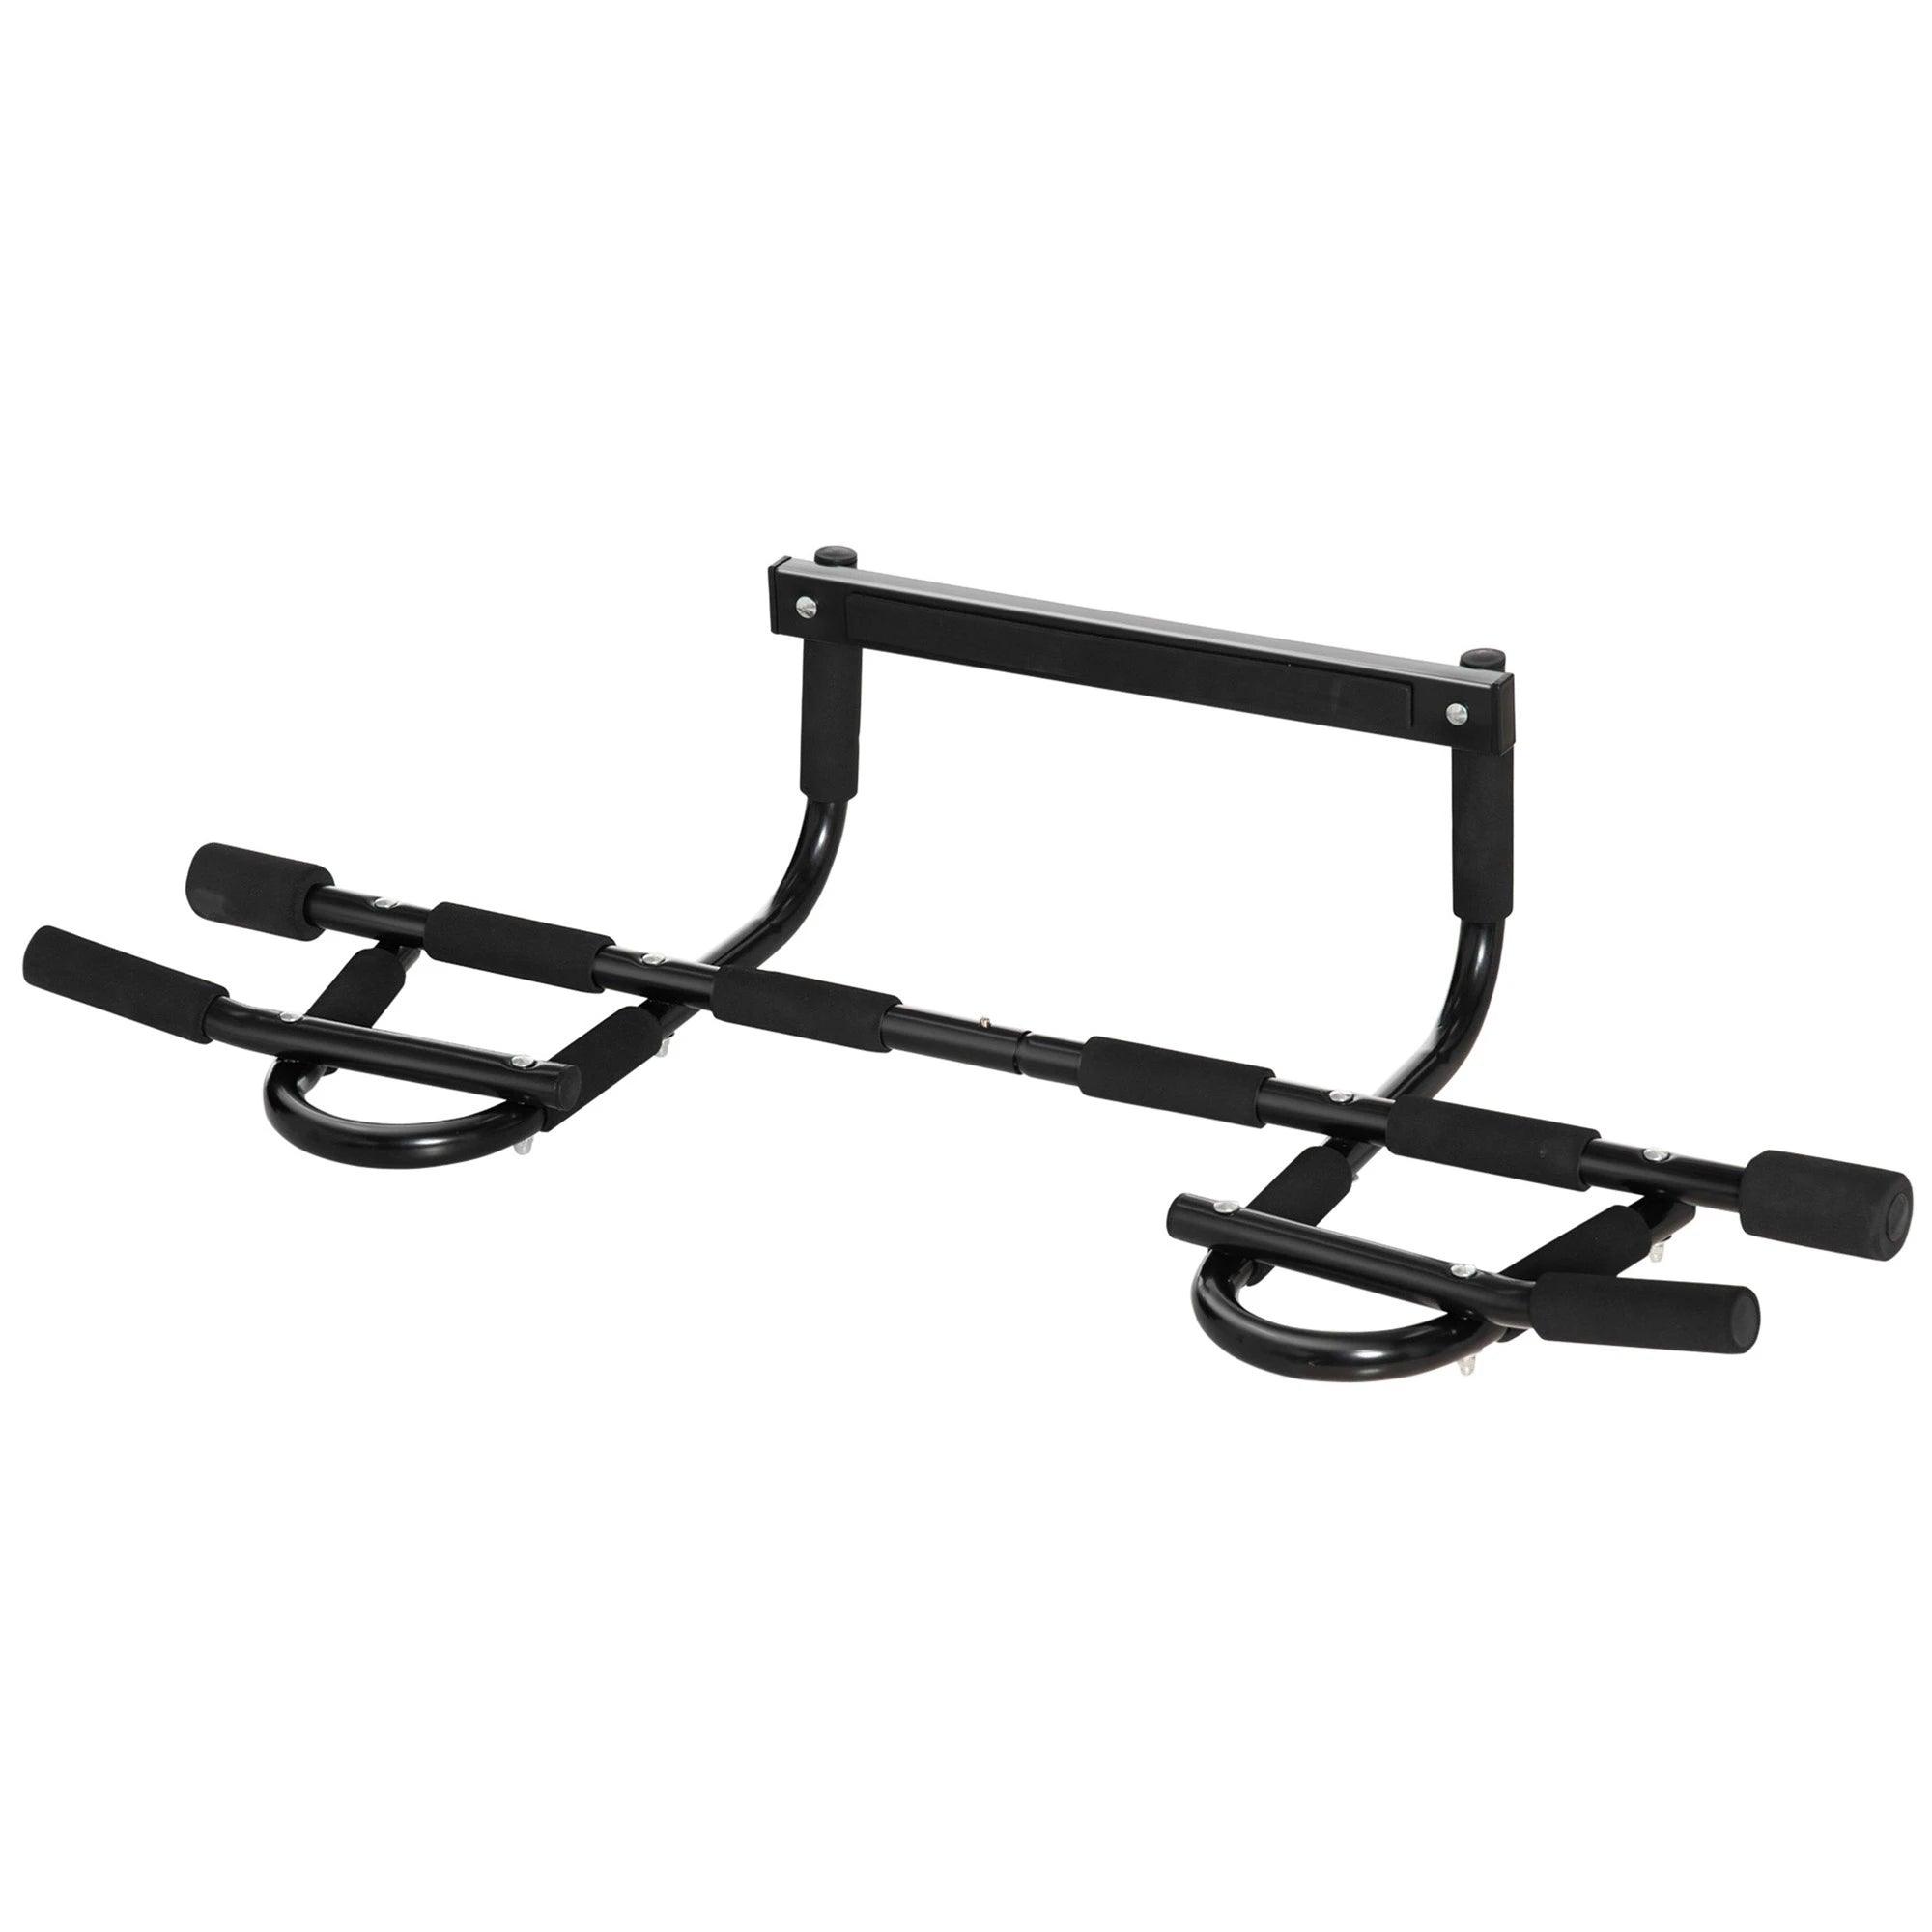 Doorway Pull Up Bar, Multifunctional Chin Up Bar, Door Exercise Equipment for Home Gym